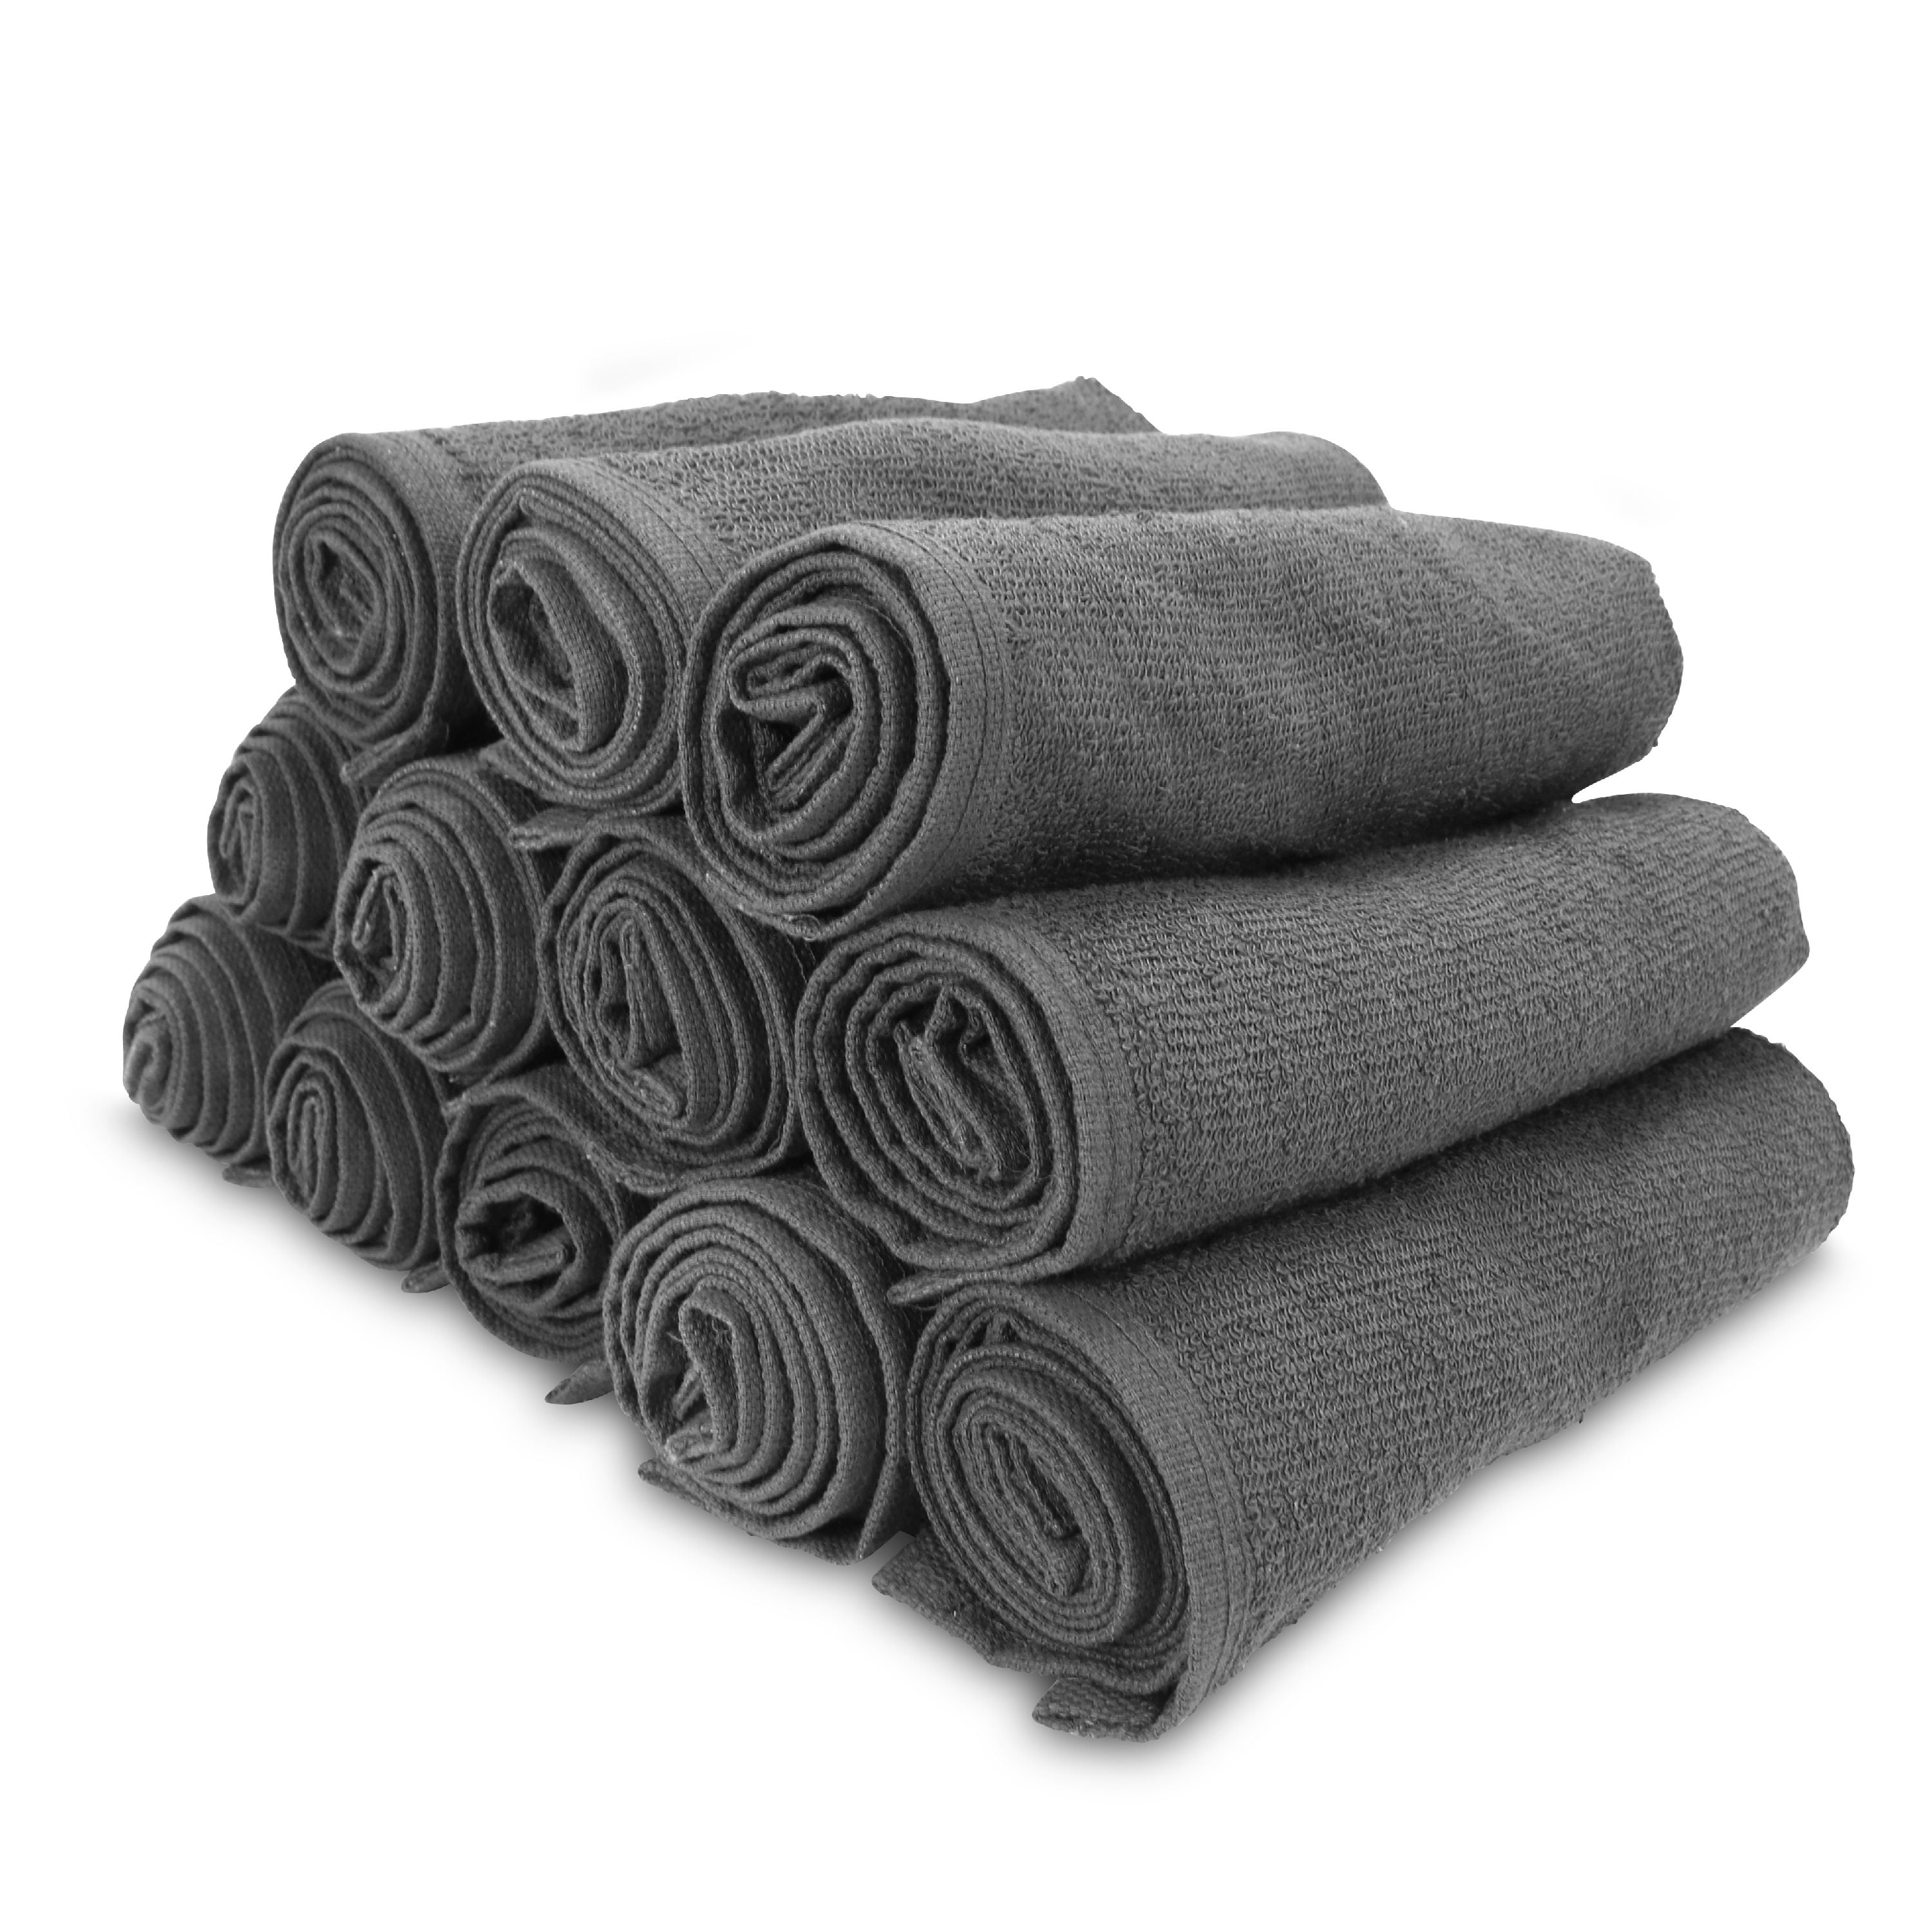 Towel and Linen Mart White Salon Towels, Pack of 12 (Not Bleach